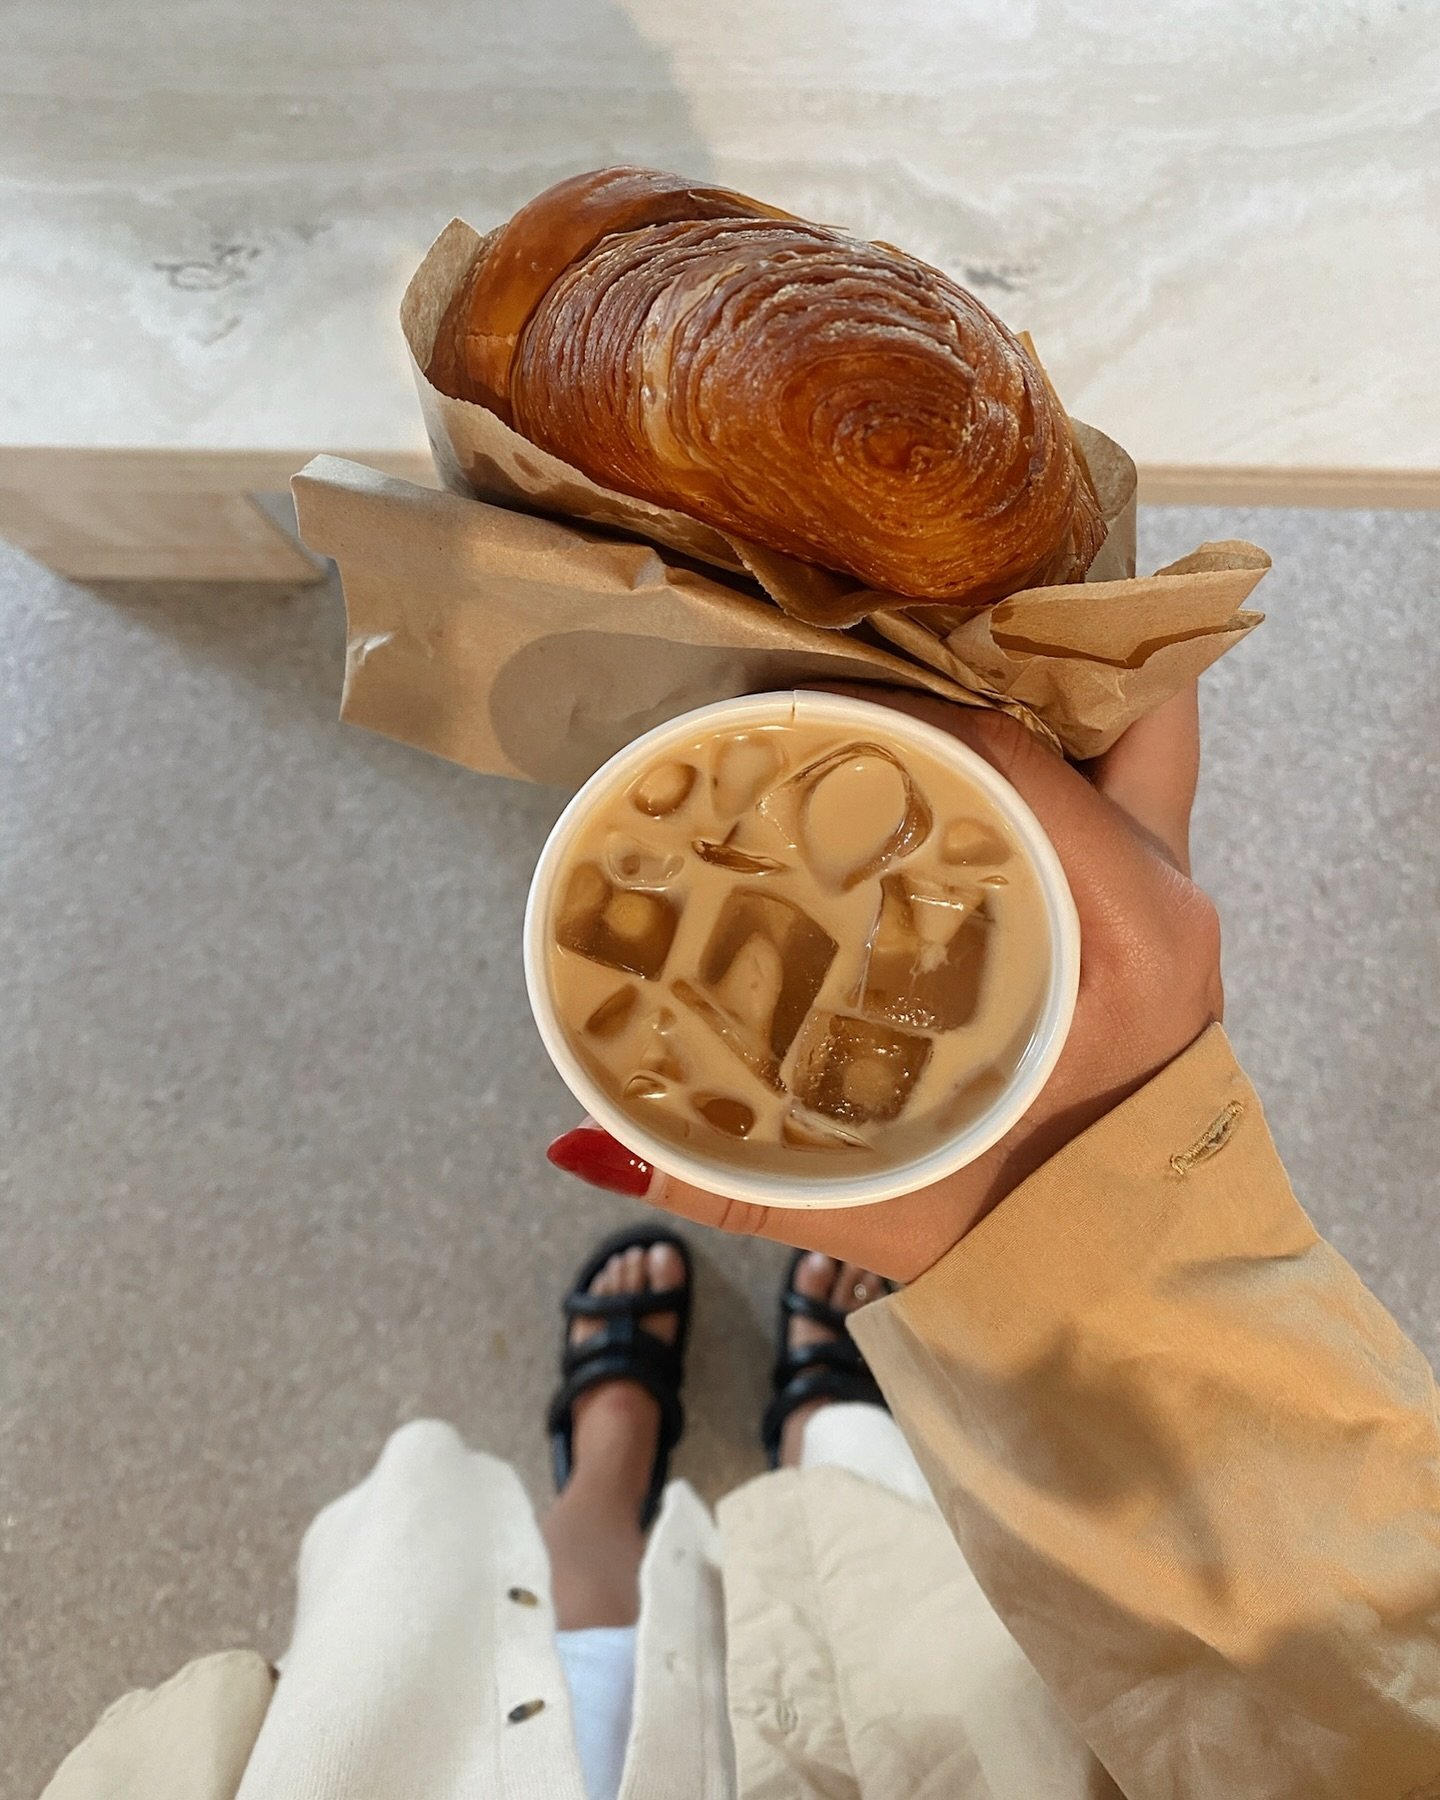 Morning essentials sorted ✔️

Visit us every day from 5:30am to get the goods. 

#sunshinecoast #coffeeshop #coffeeandcroissant #marcoola #bobbilane